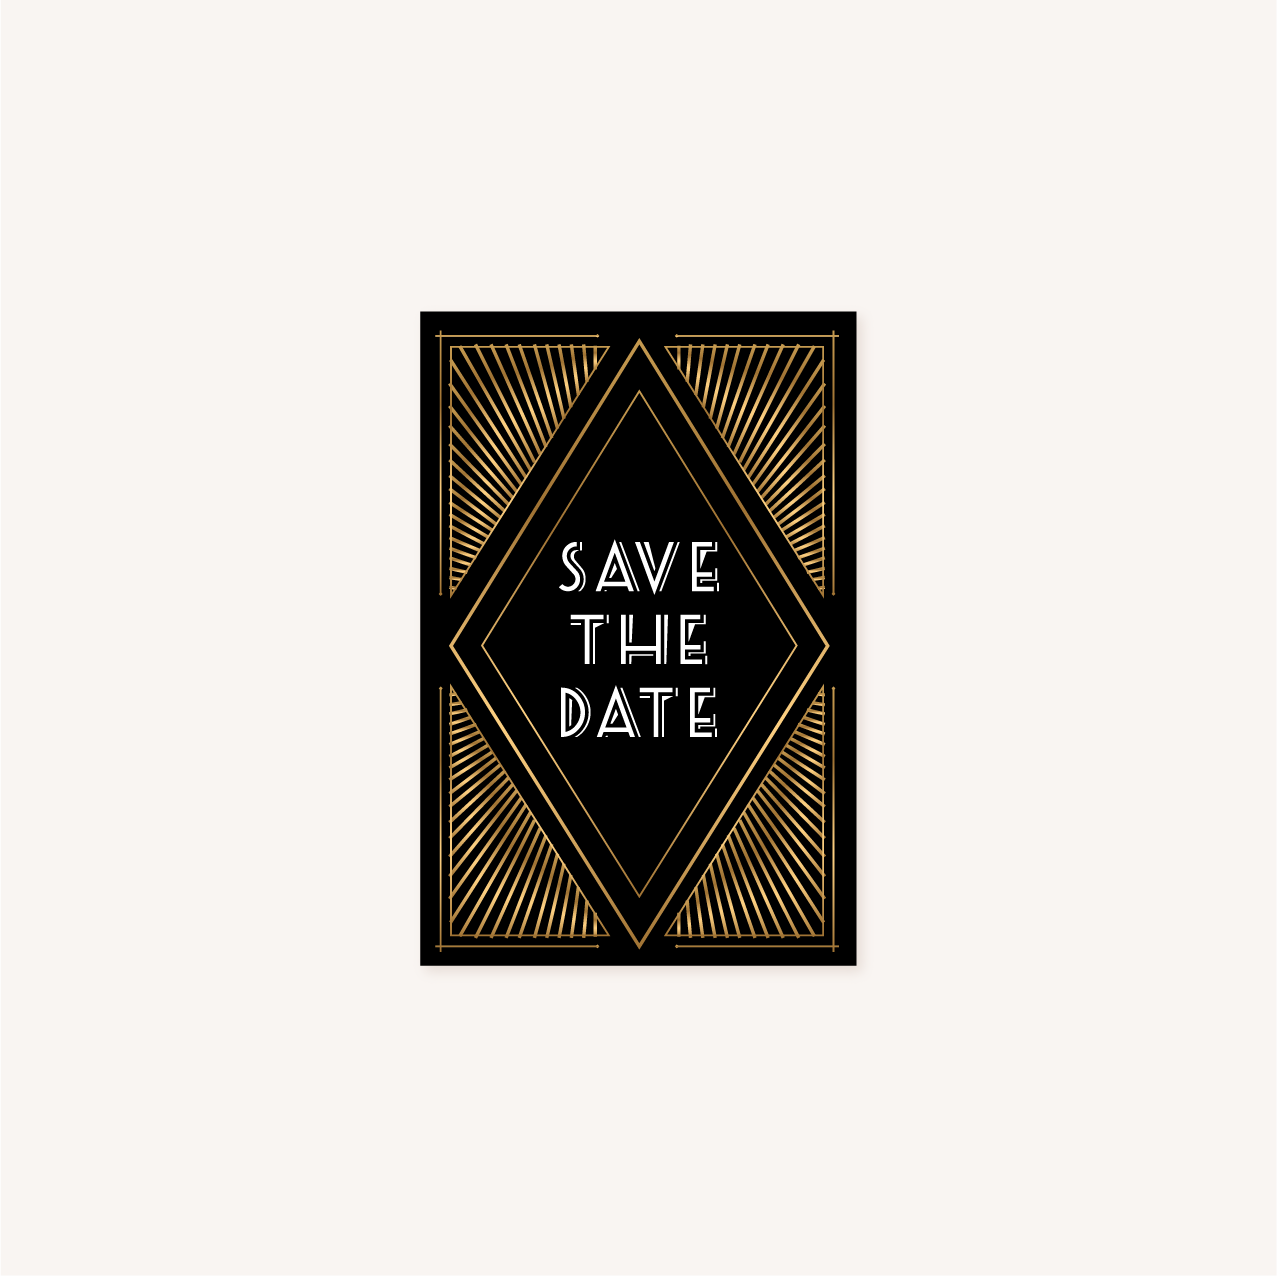 save the date mariage art deco gatsby noir or dore